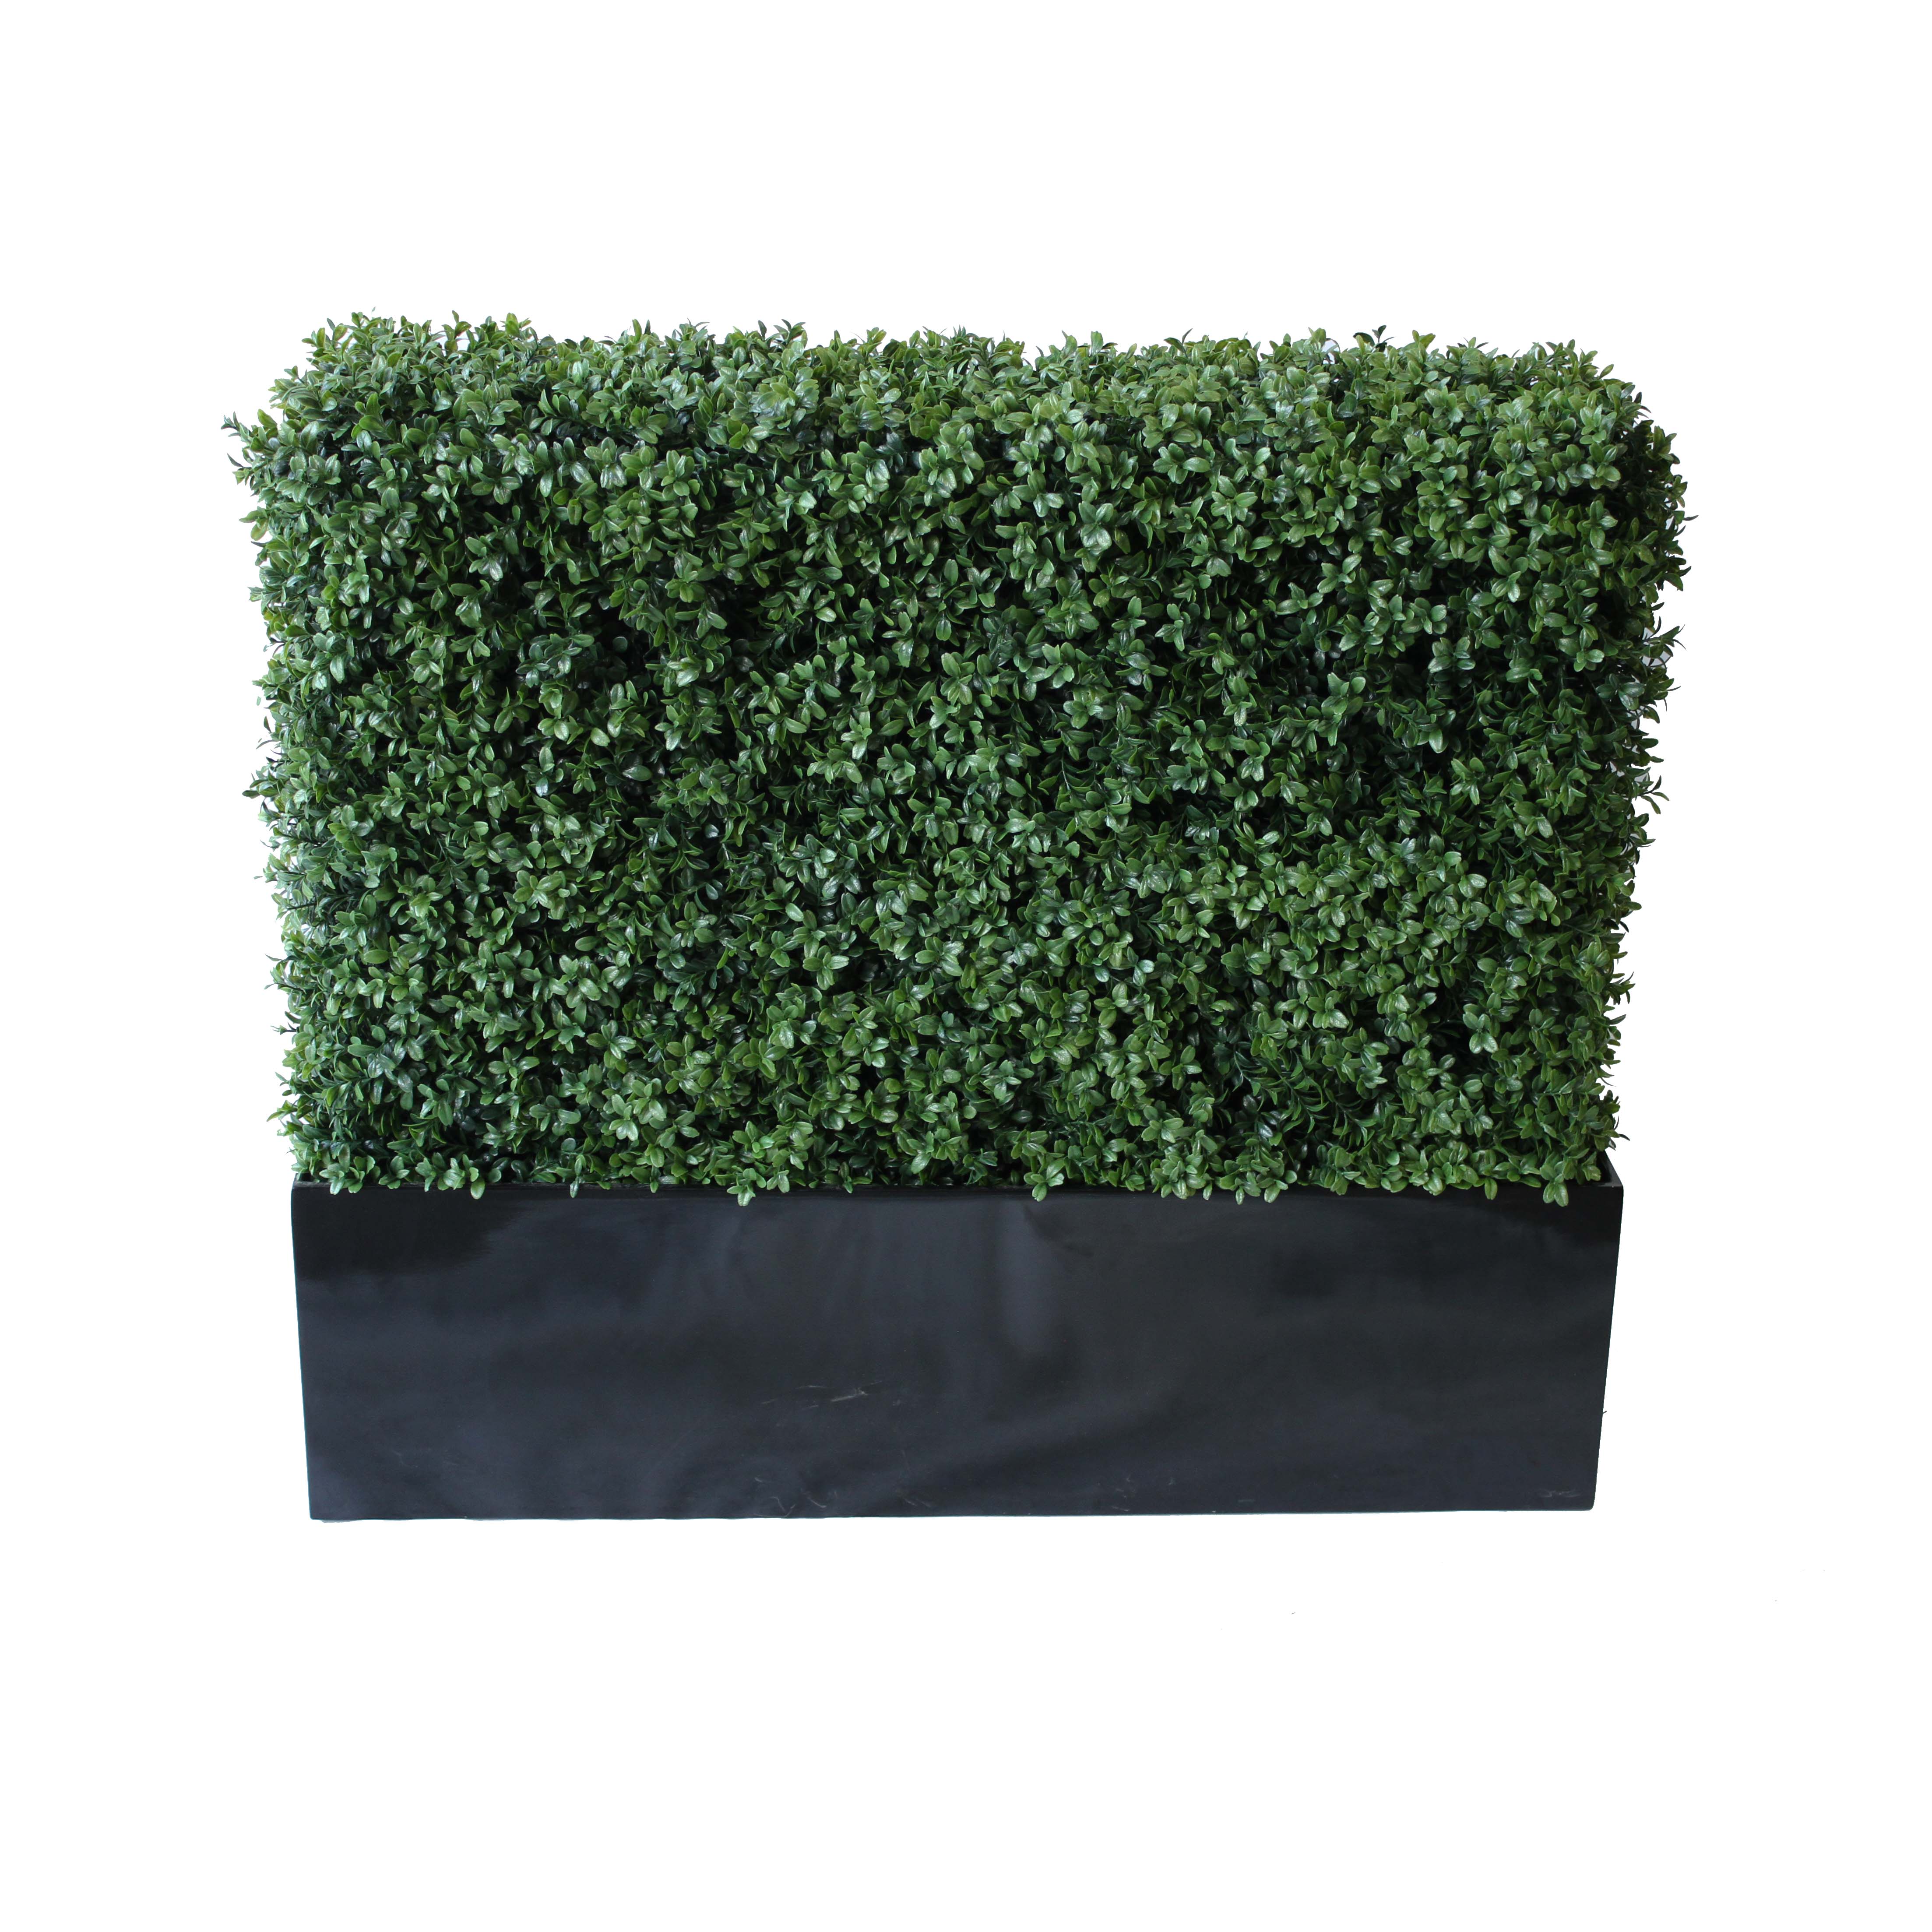 PREMIUM DELUXE BOXWOOD HEDGE 120 WIDE X 95CM TALL WITH FIBREGLASS TROUGH